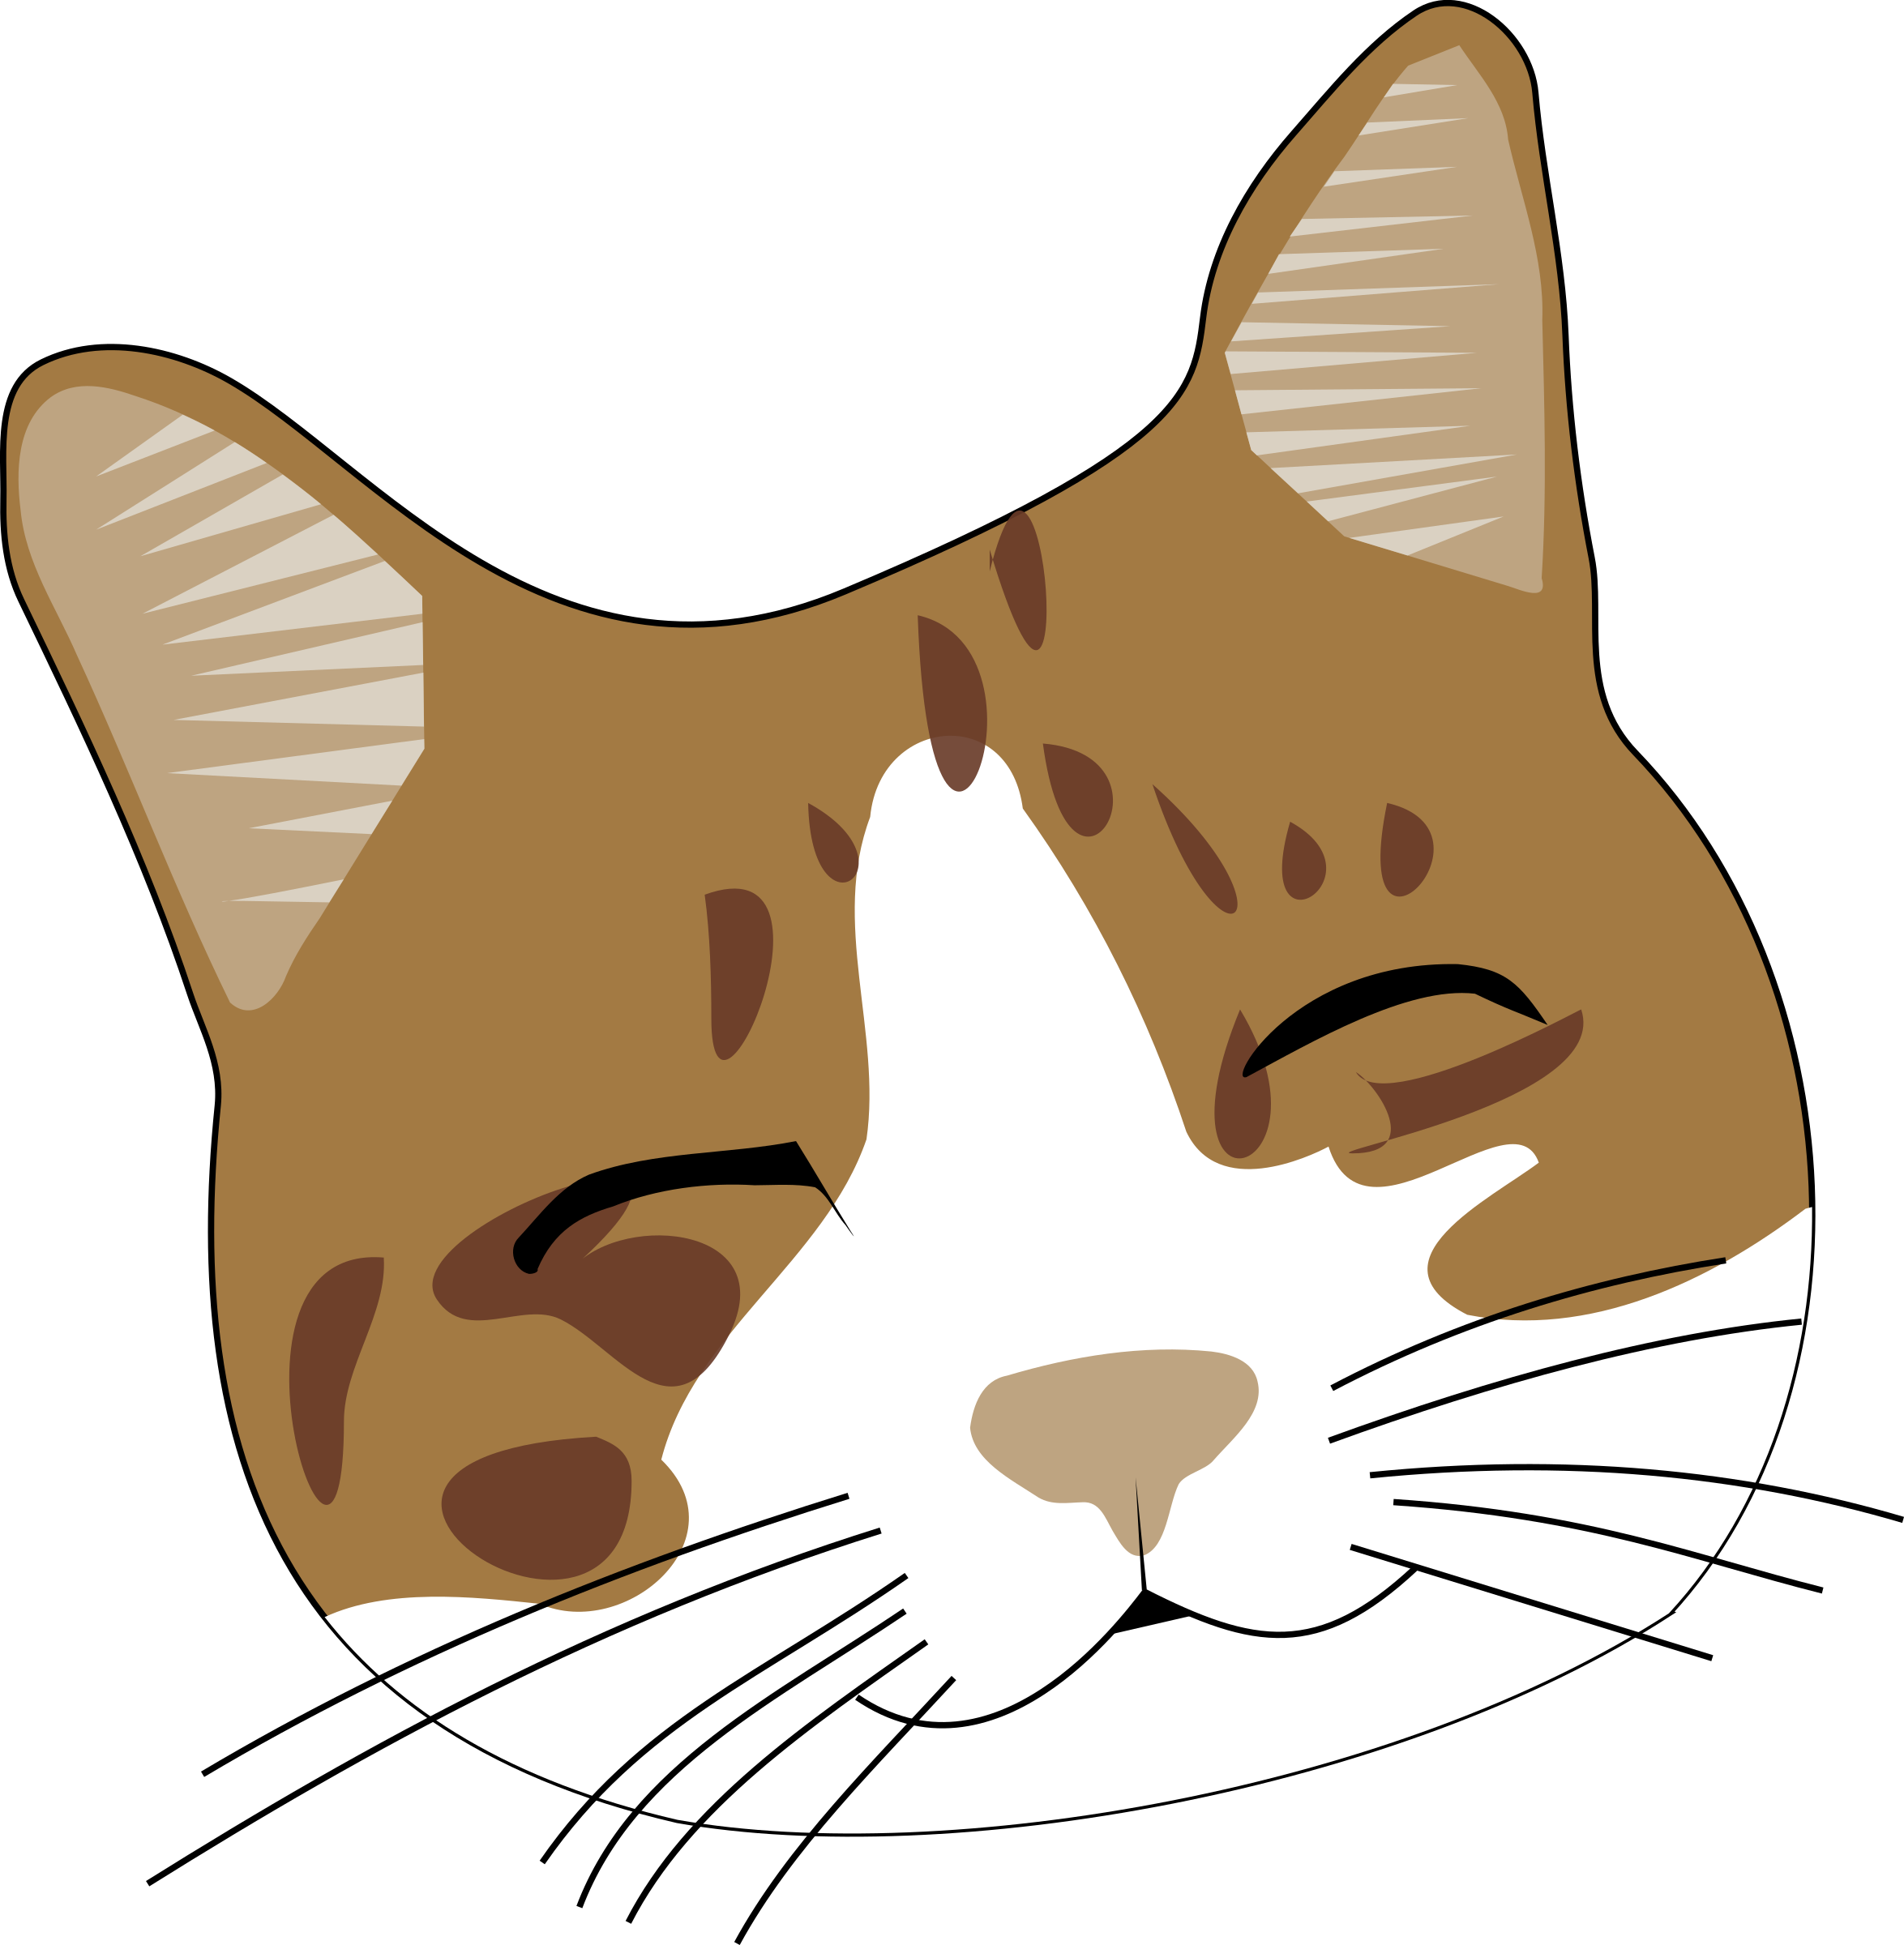 Smile cat icons png. Cougar clipart cartoon